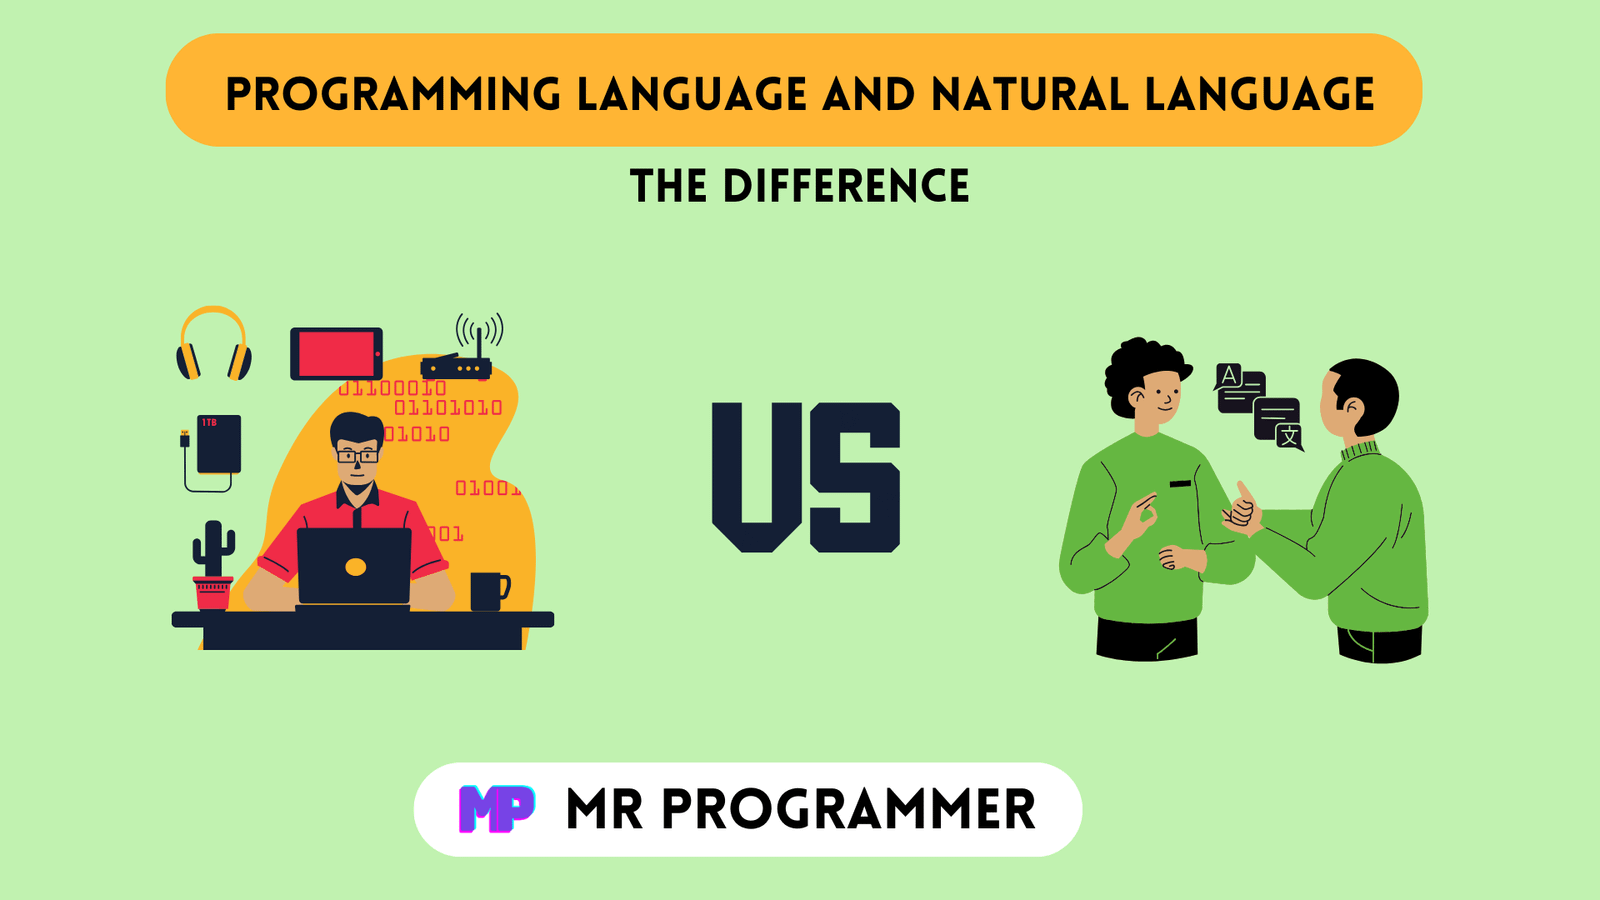 What Is the Difference Between a Programming Language and Natural (Every-Day) Language